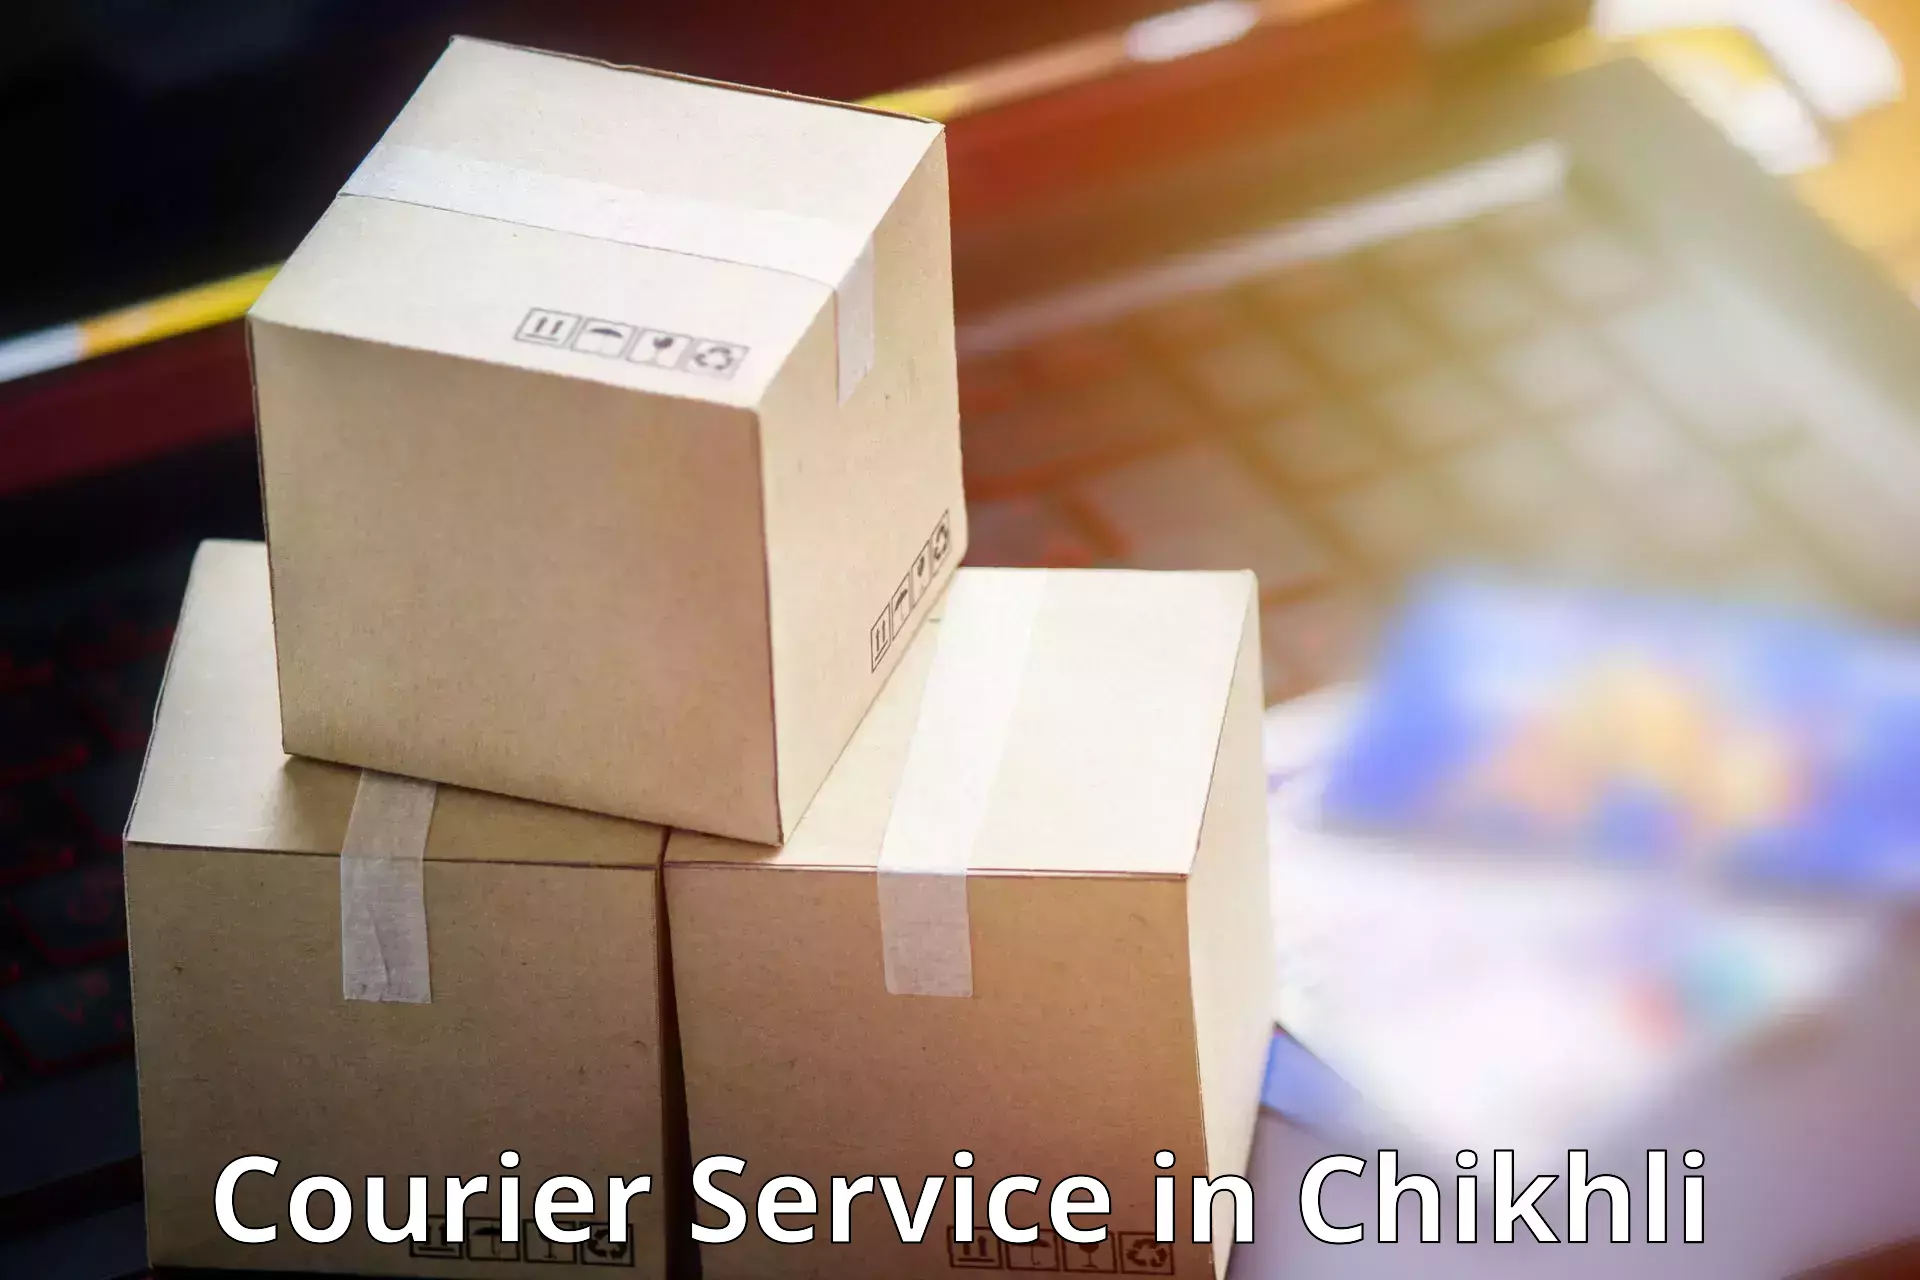 Express delivery network in Chikhli